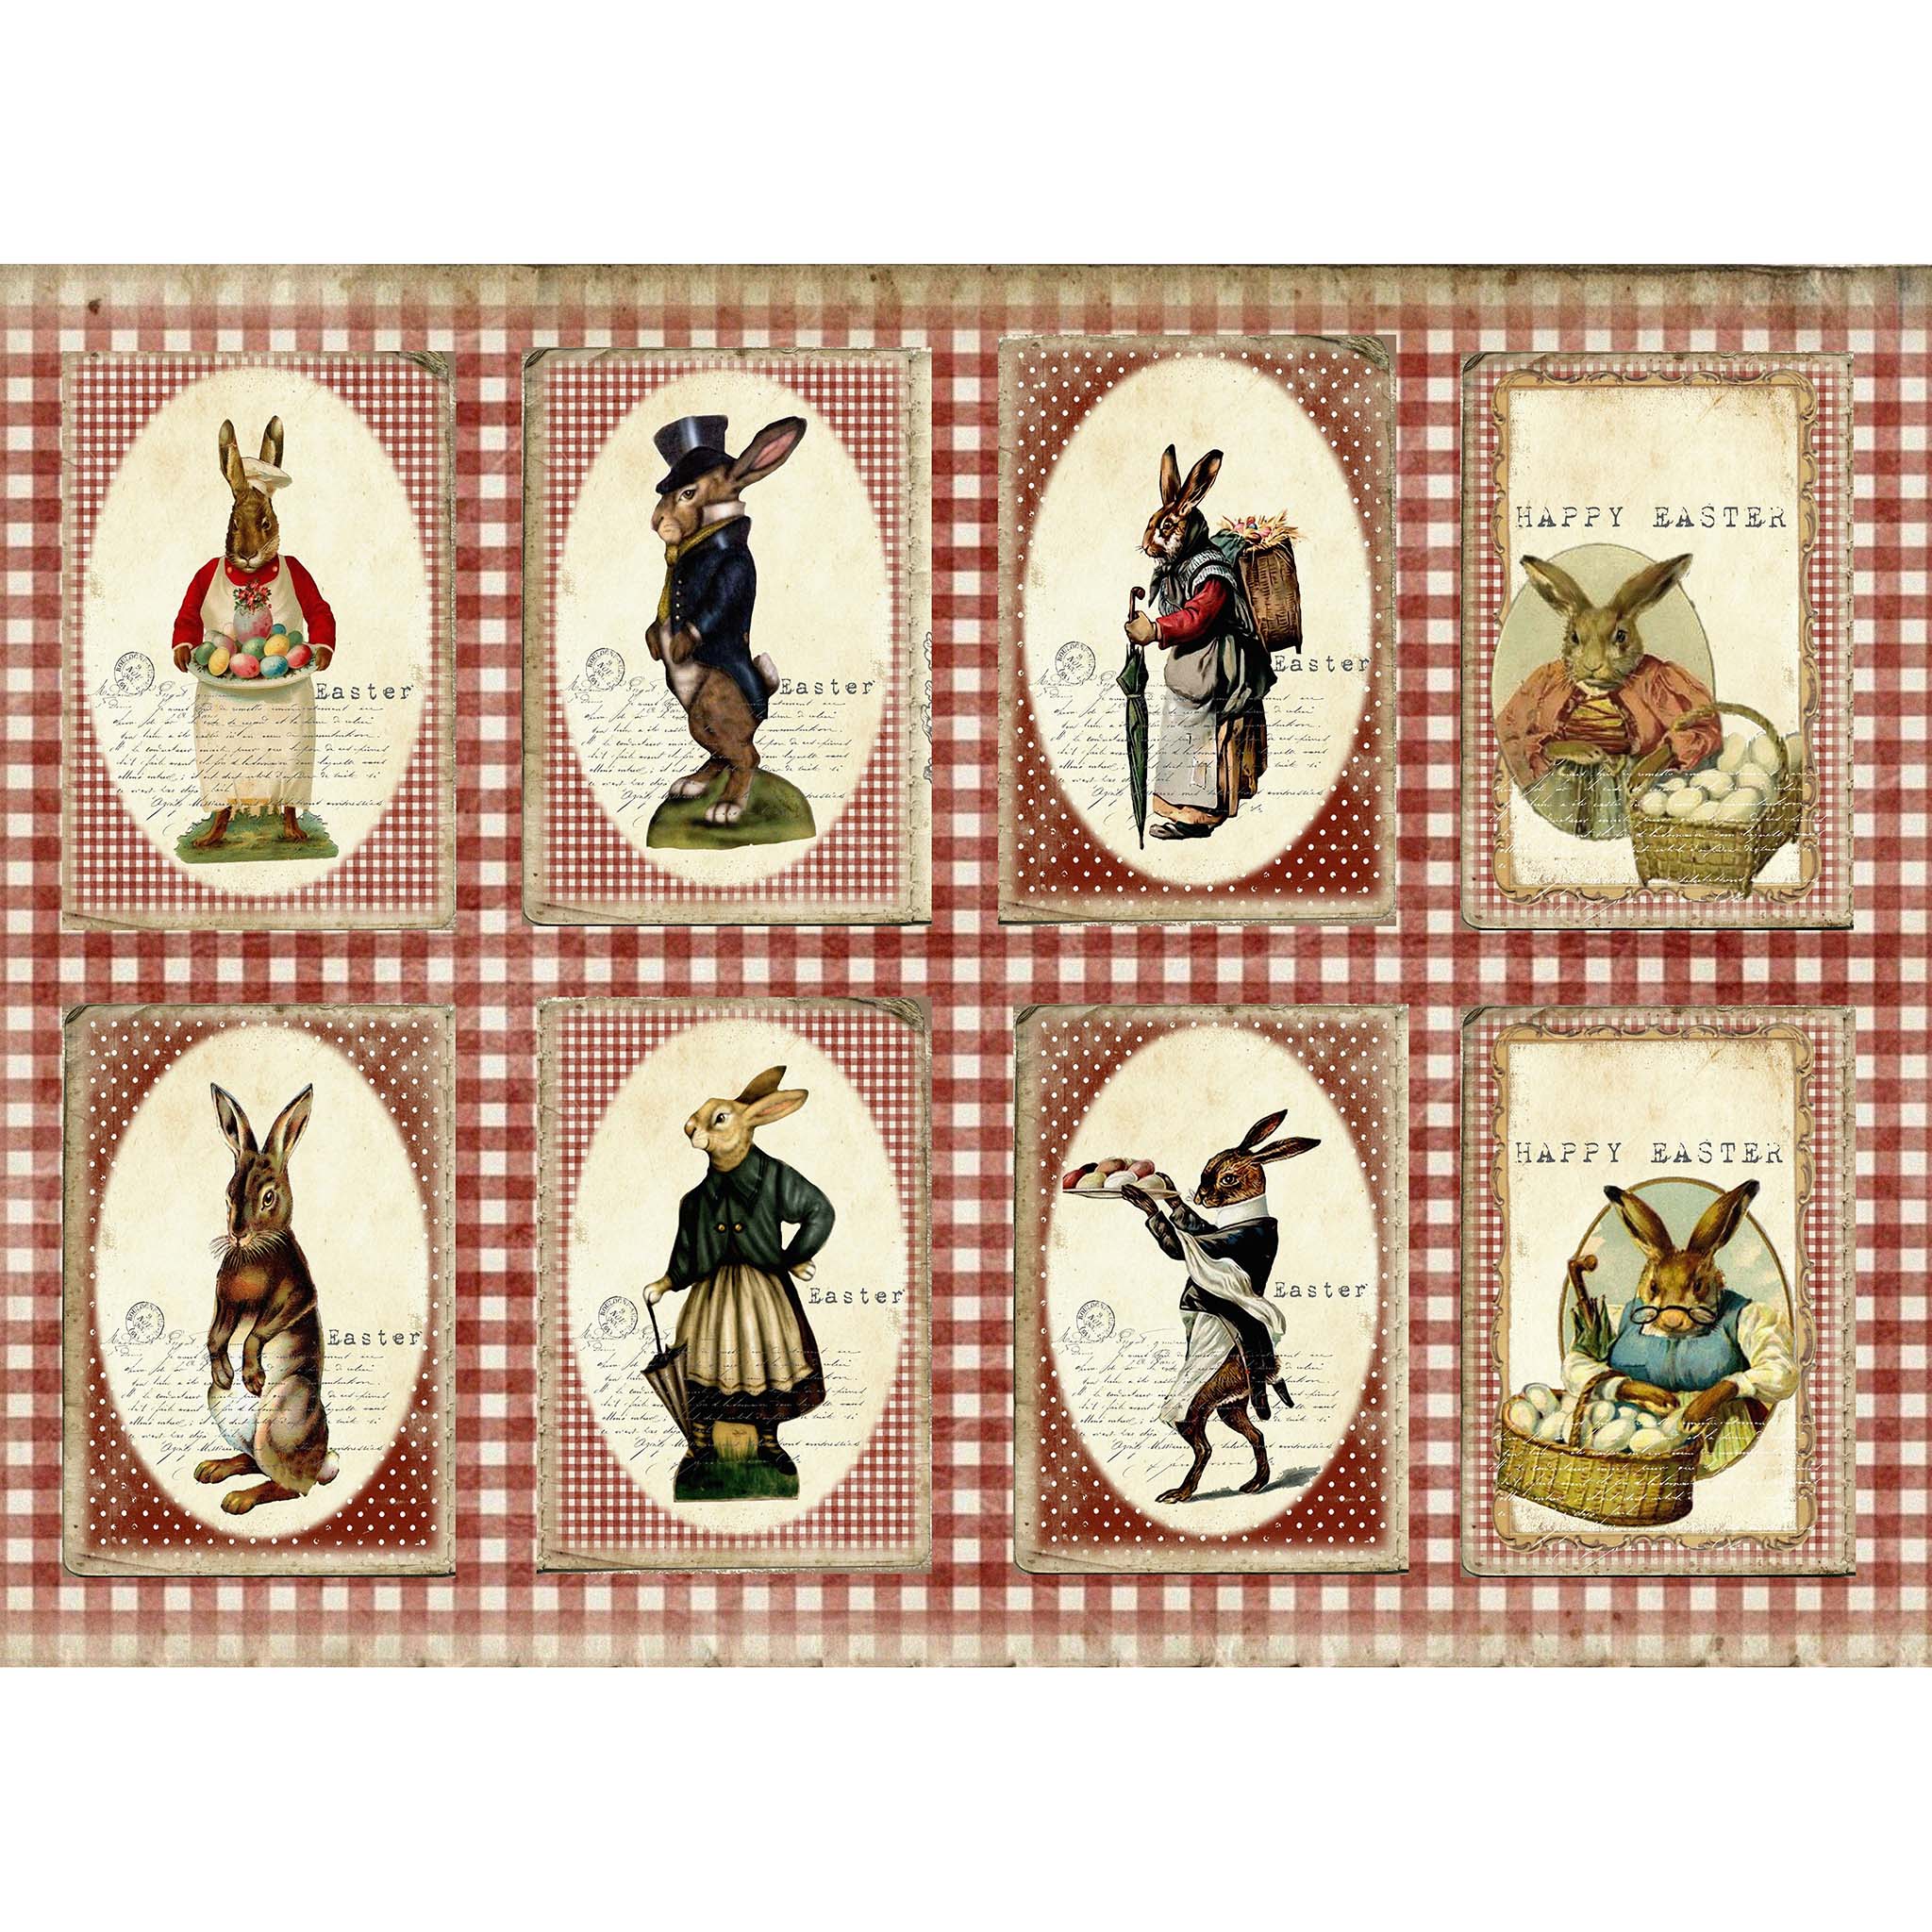 Tissue paper design that features 8 card images of stylishly dressed rabbits on a bold red check background White borders are on the top and bottom.